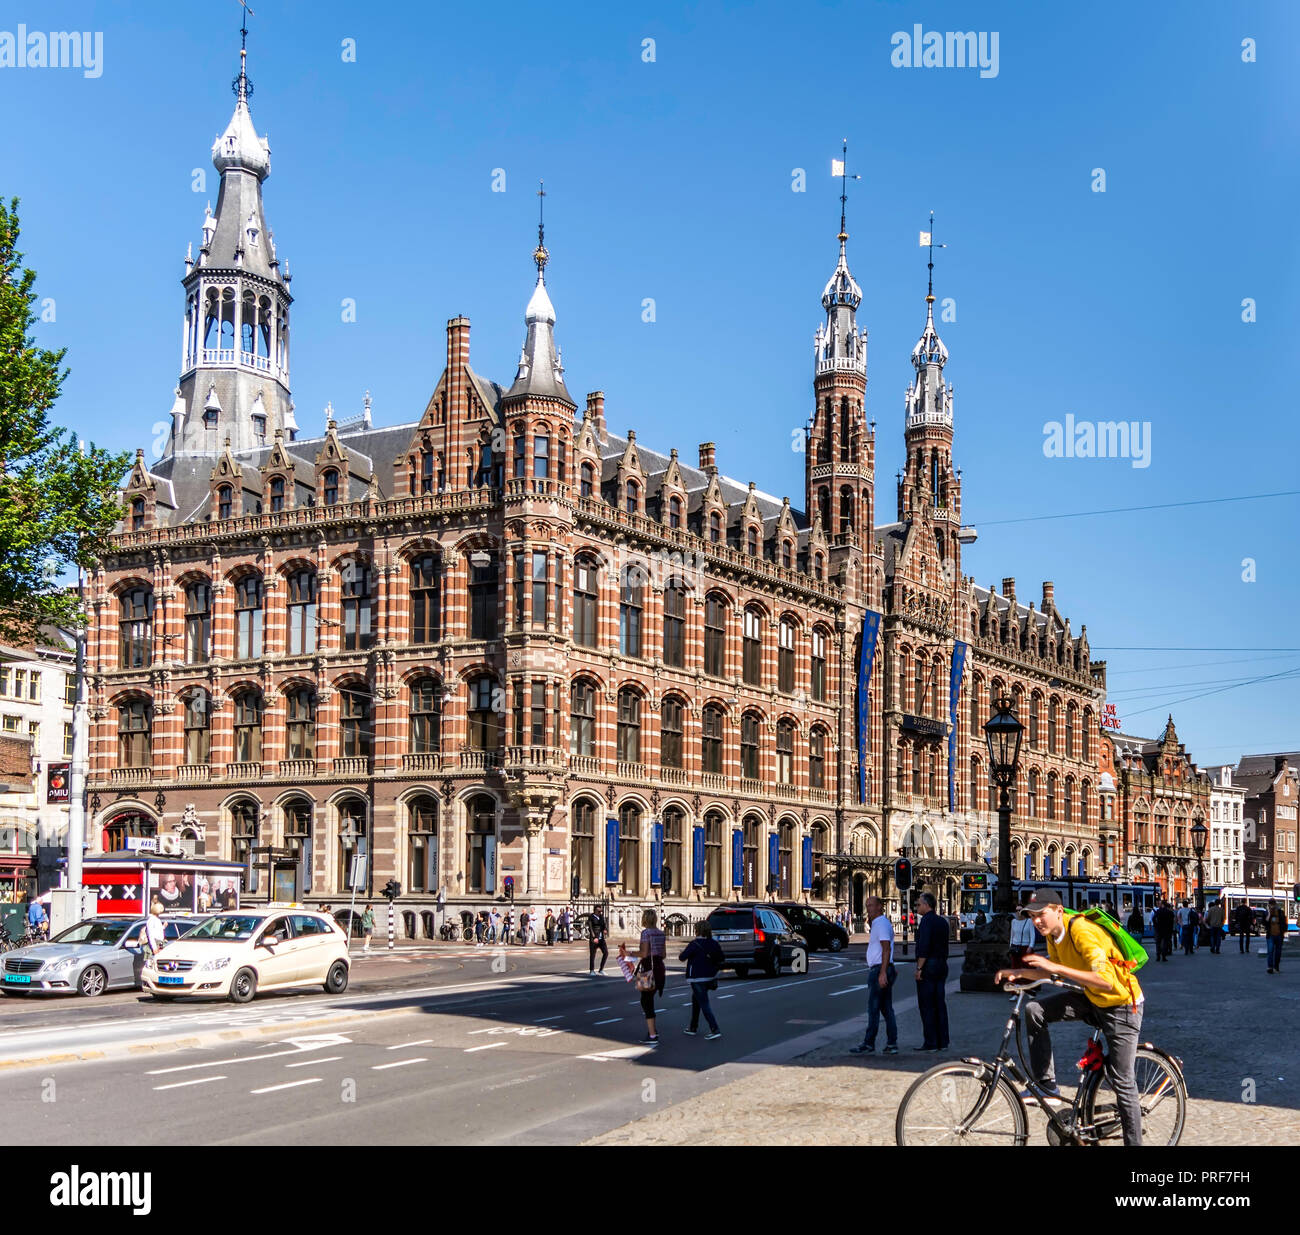 Amsterdam, Netherlands - May 21, 2018: Shopping center Magna Plaza in the monumental Former Main Post Office building. Stock Photo